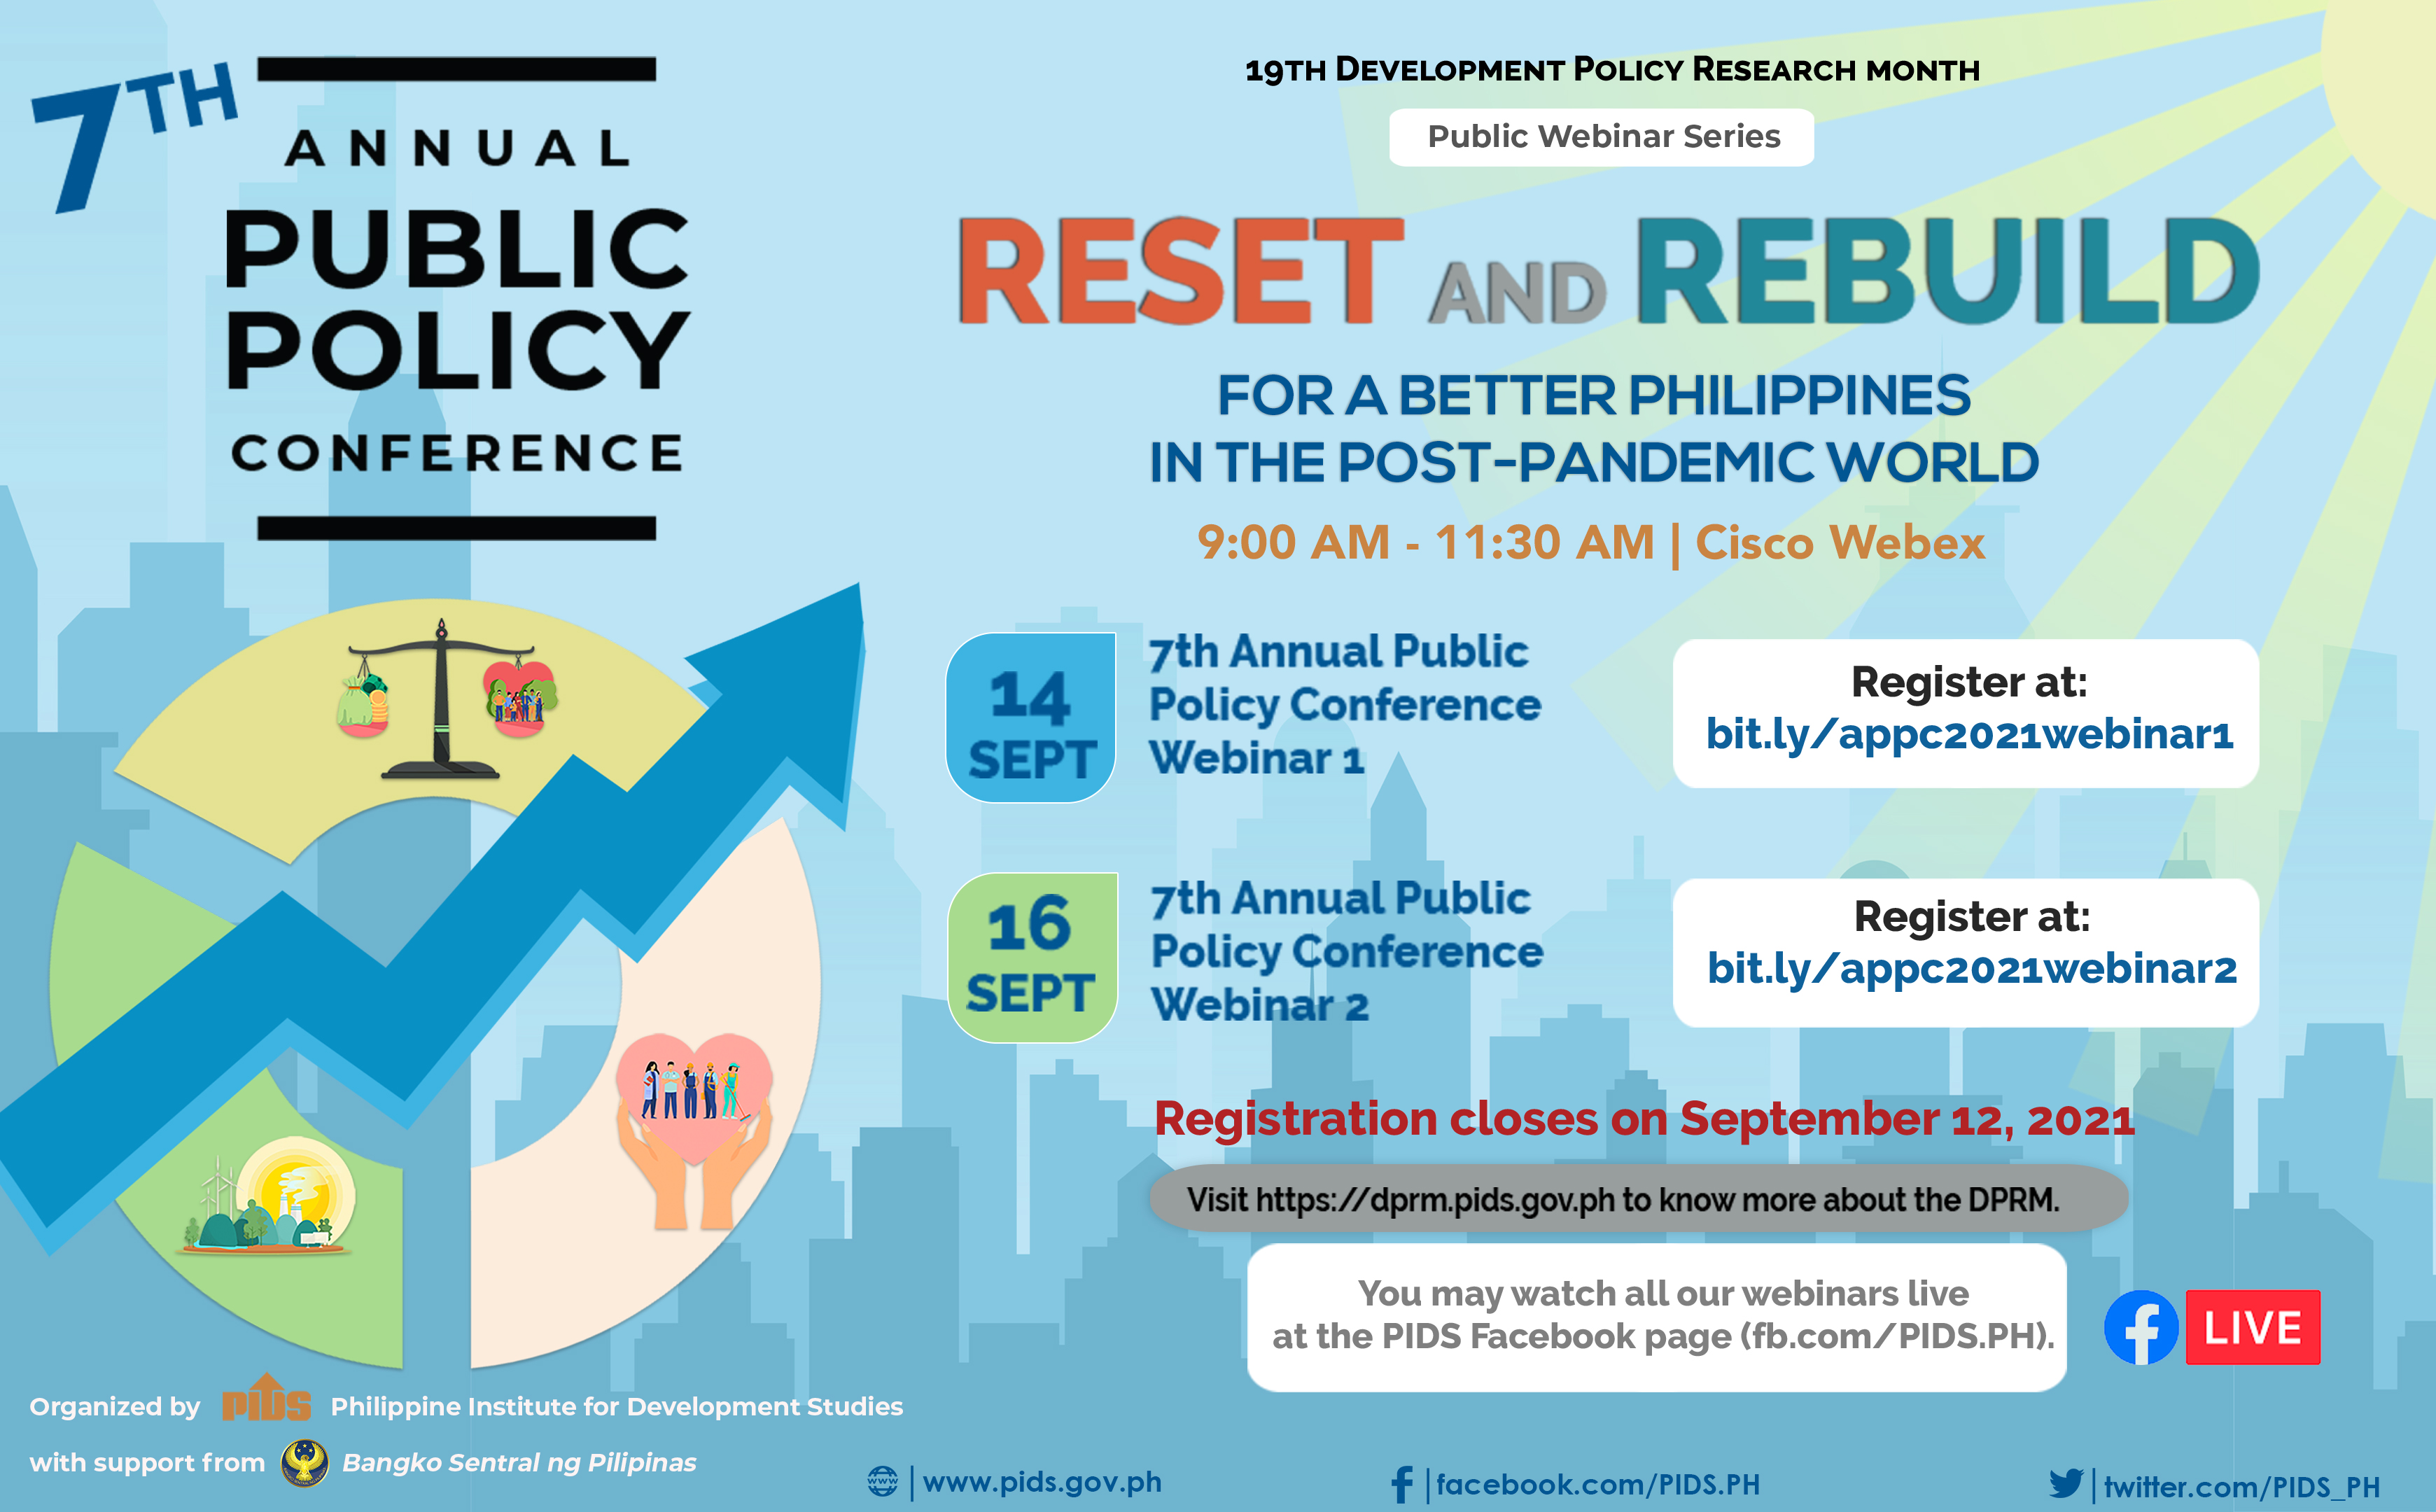 7th Annual Public Policy Conference Webinars 1 and 2 